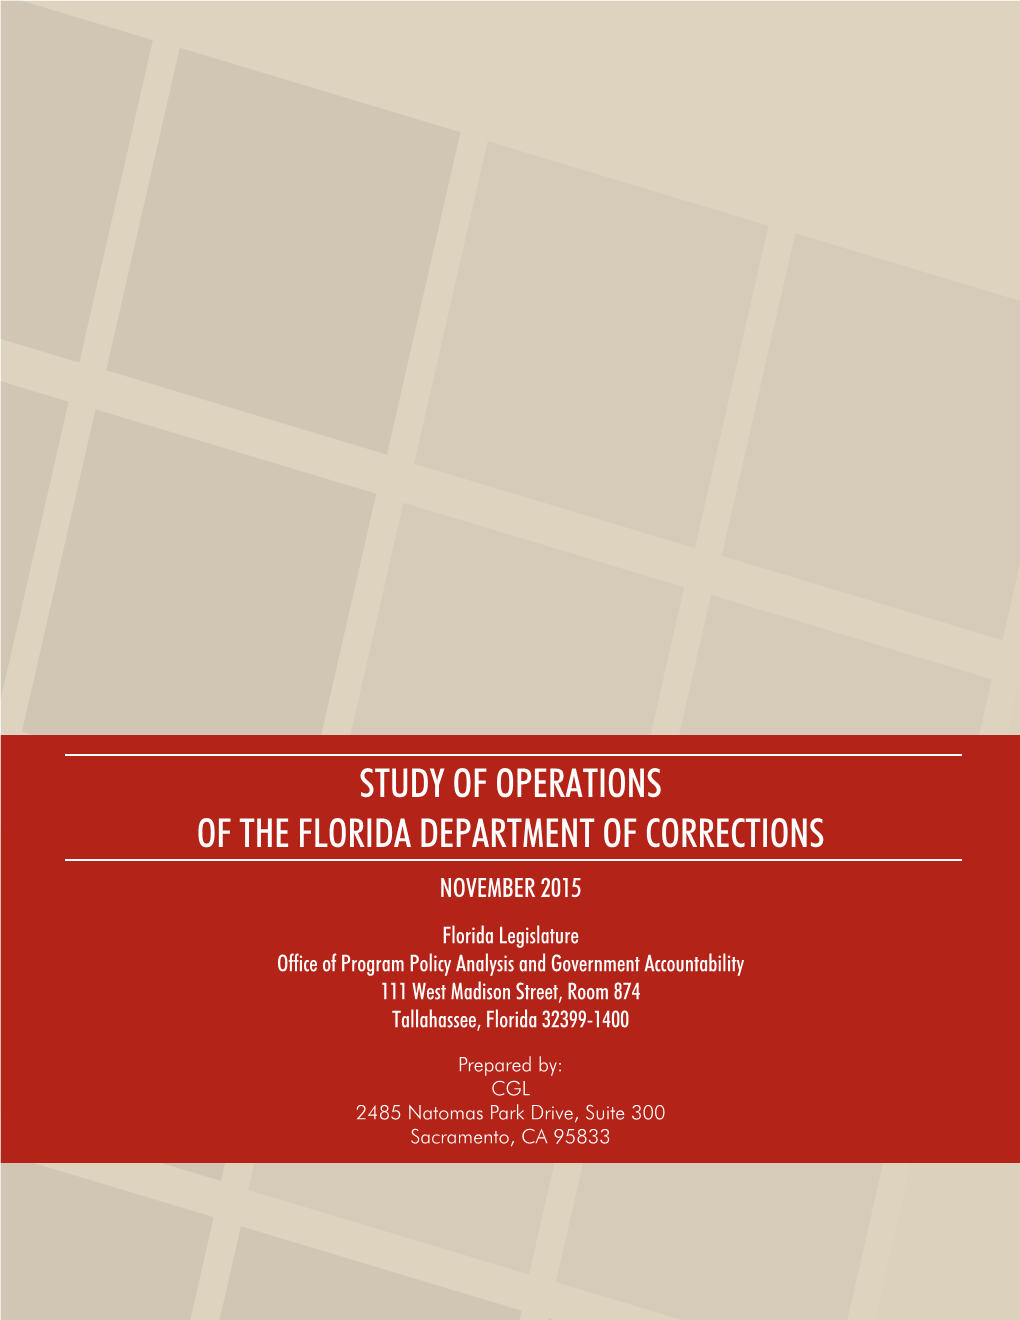 Study of Operations of the Florida Department of Corrections